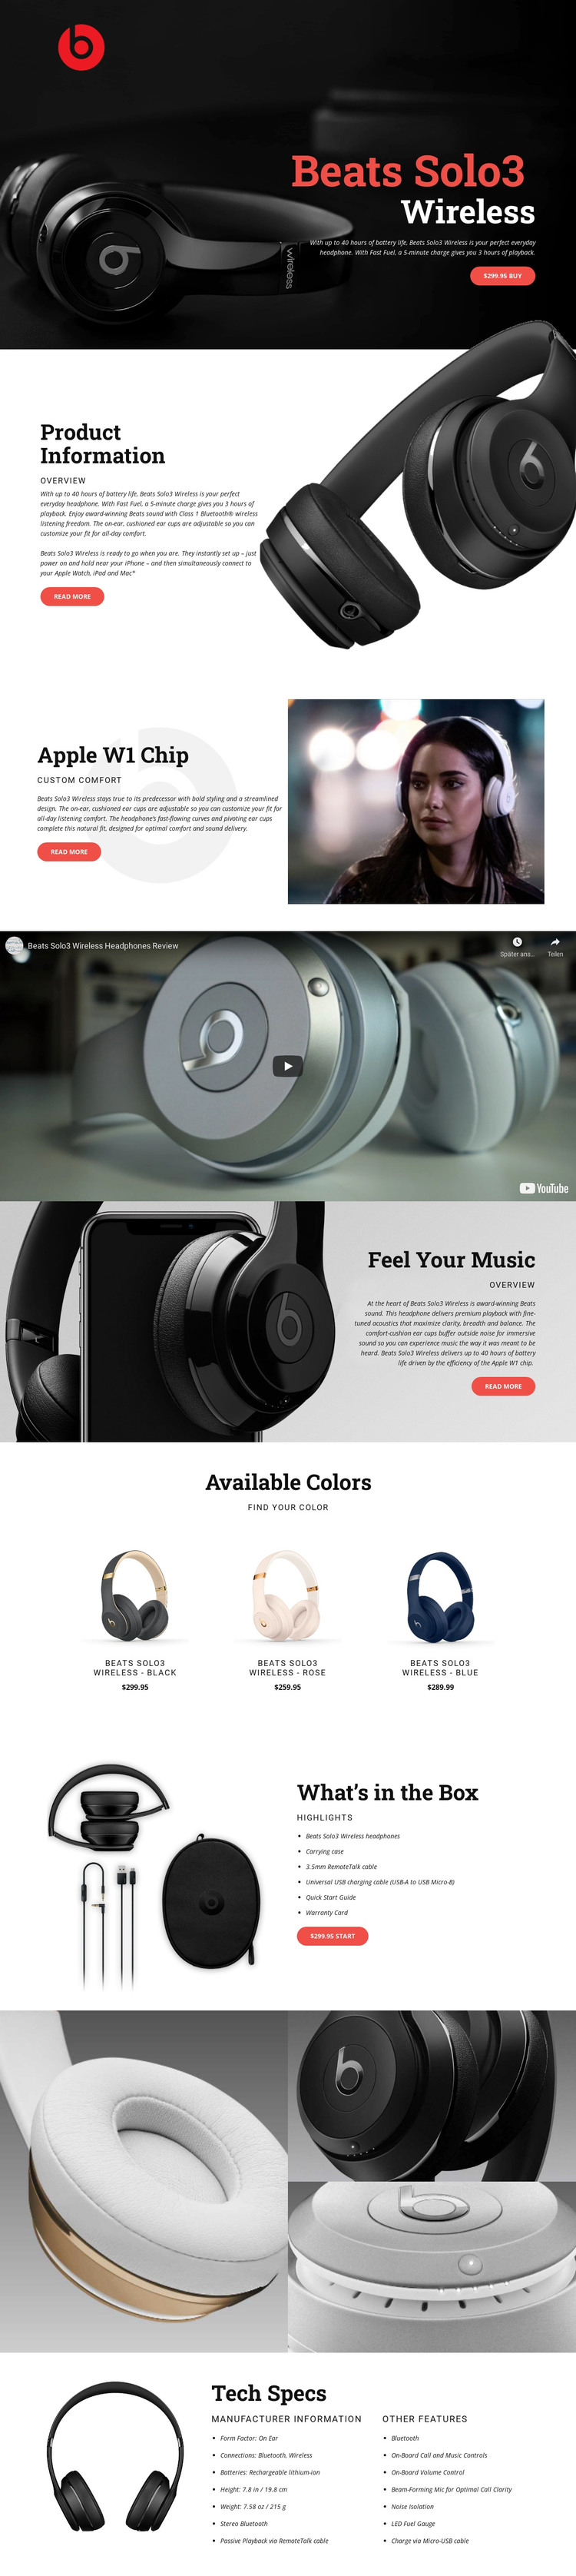 Outstanding quality of music Web Design